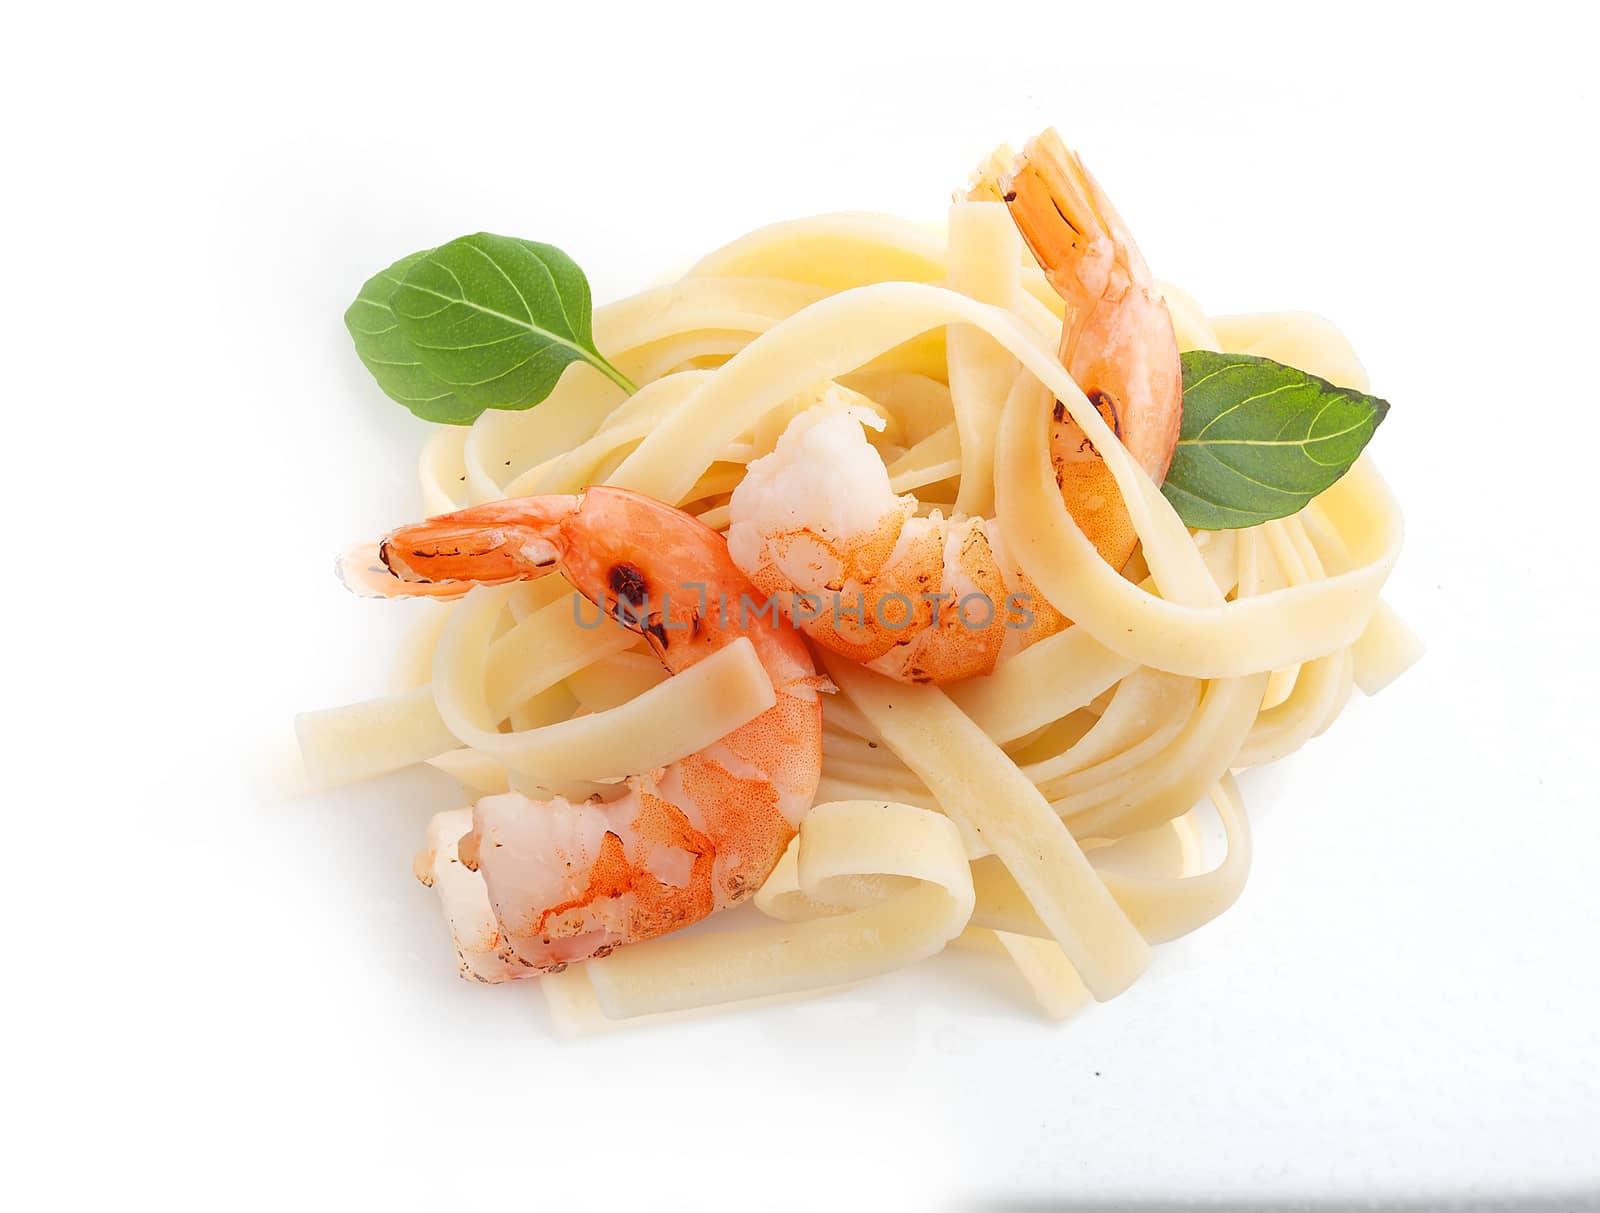 Roasted shrimps with pasta and fresh basil on the white background